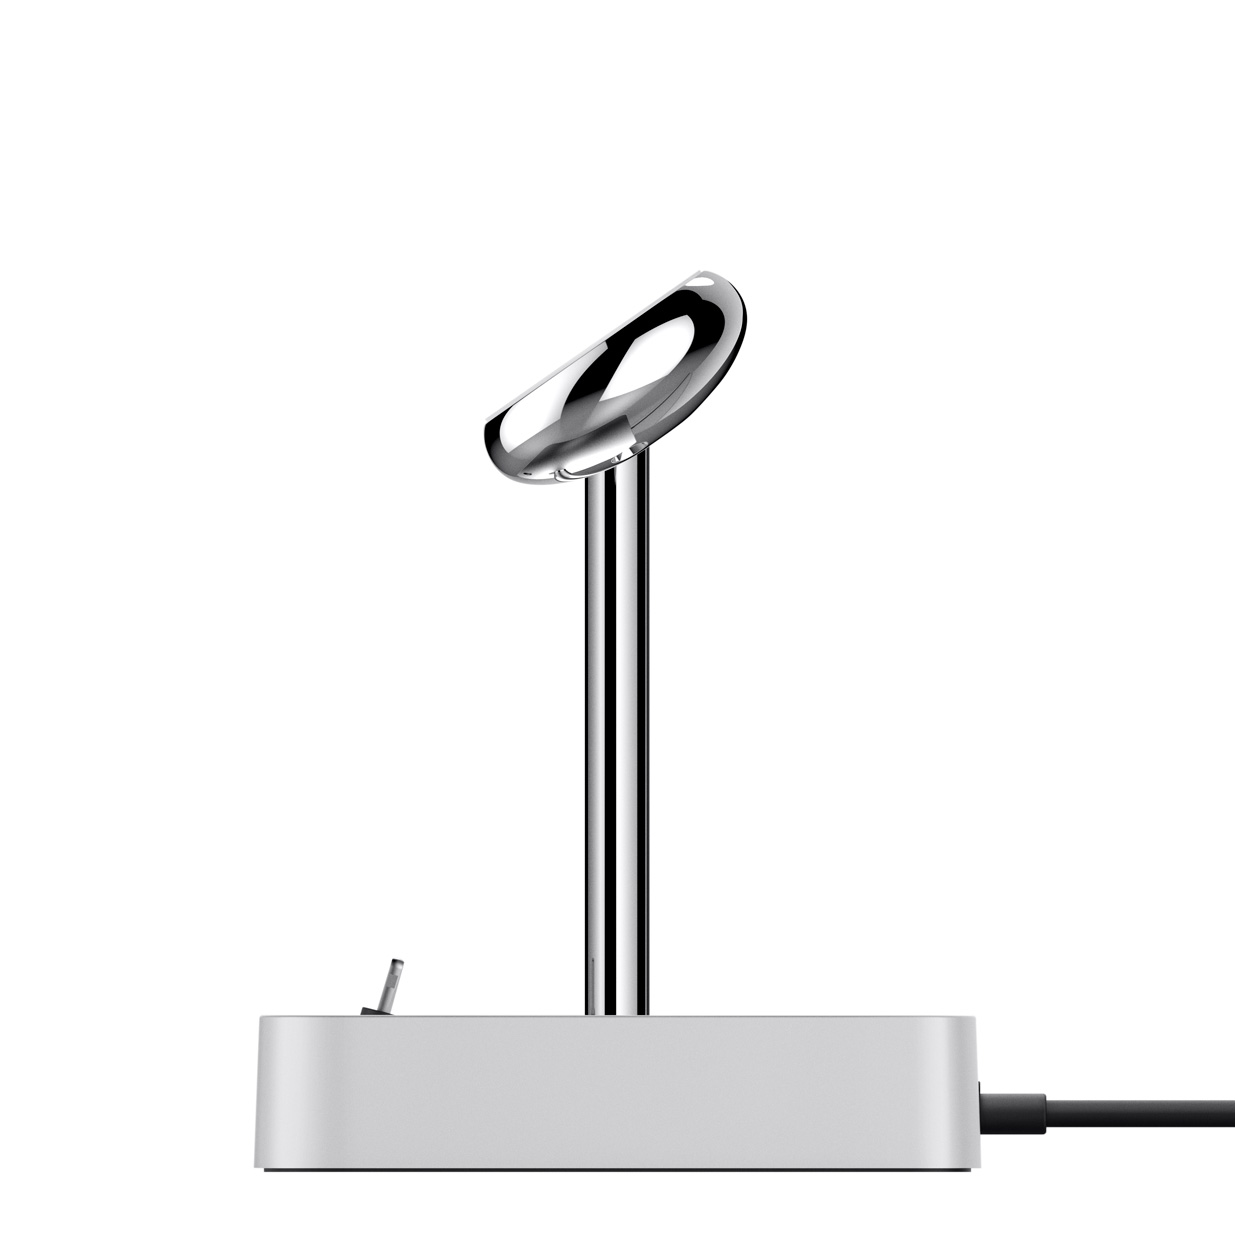 Belkin Announces New Charge Dock for Apple Watch and iPhone [Video]